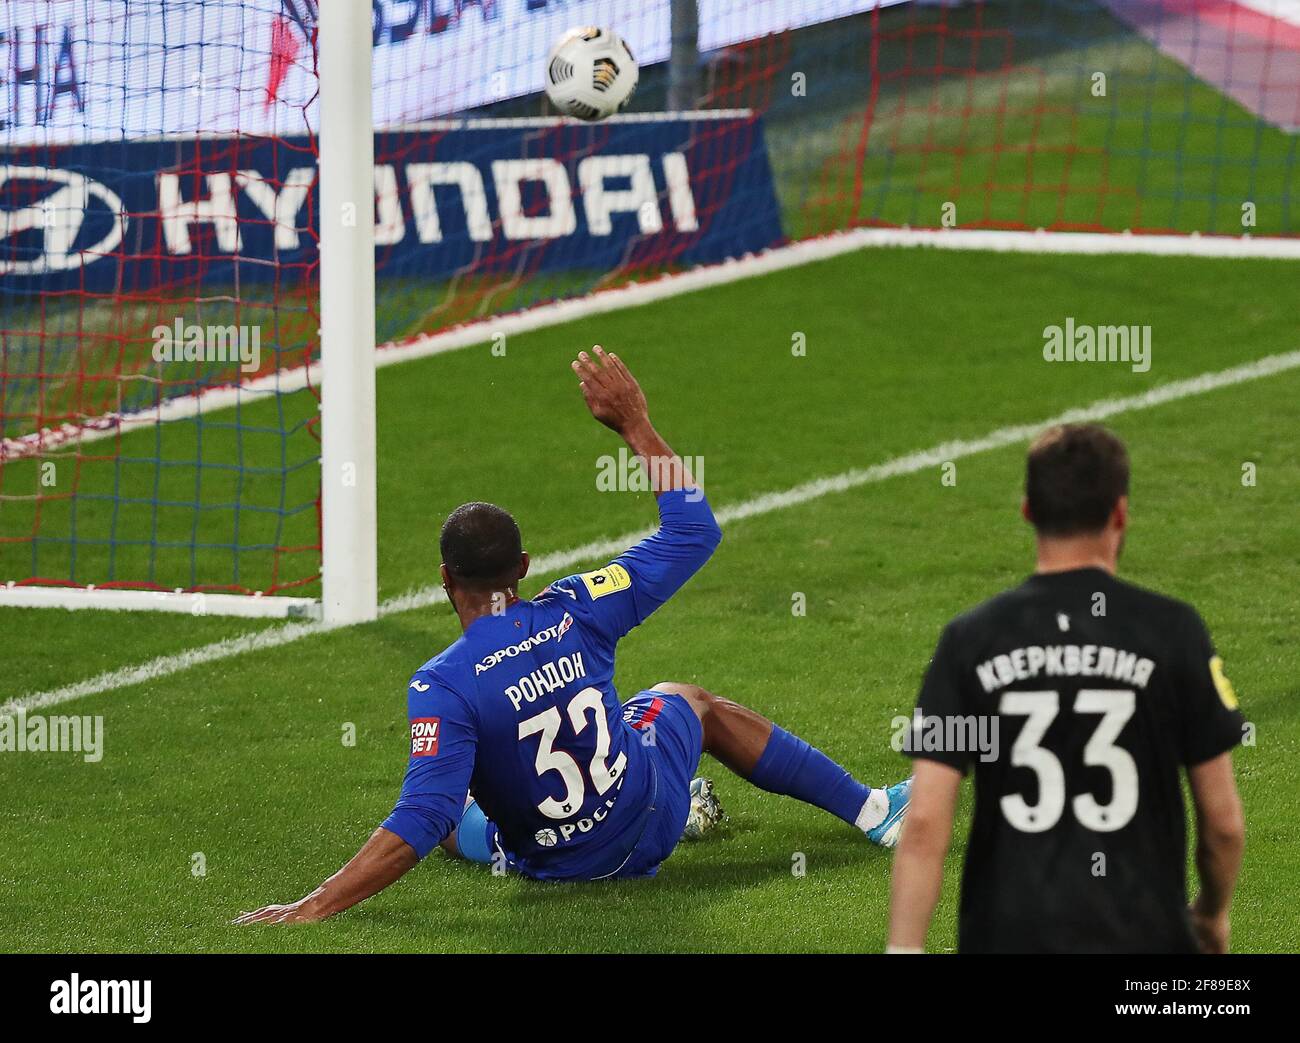 Moscow, Russia. 12th Apr, 2021. CSKA Moscow's Salomon Rondon (L) scores a  goal in a 2020/2021 Russian Premier League Round 25 football match between  CSKA Moscow and Rotor Volgograd at CSKA Arena (